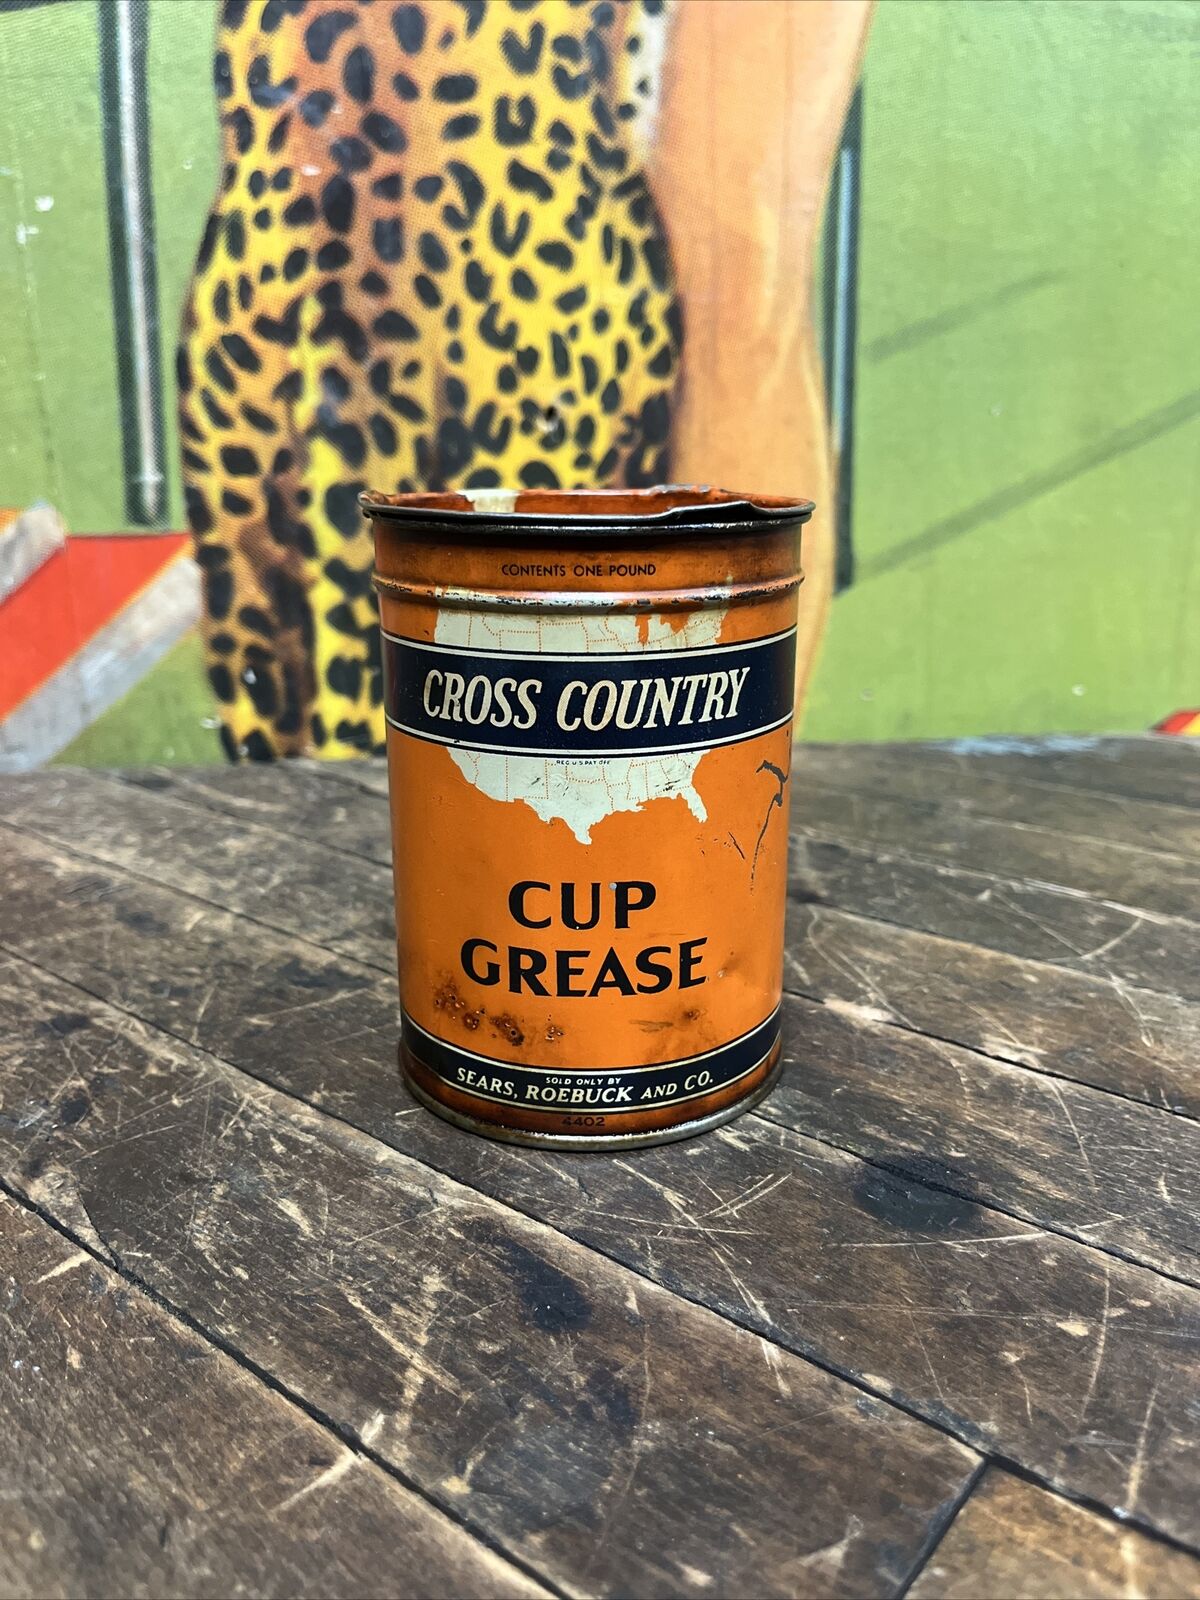 VINTAGE CROSS COUNTRY 1 LB CUP GREASE CAN TIN SIGN UNITED STATES SEARS ROEBUCK